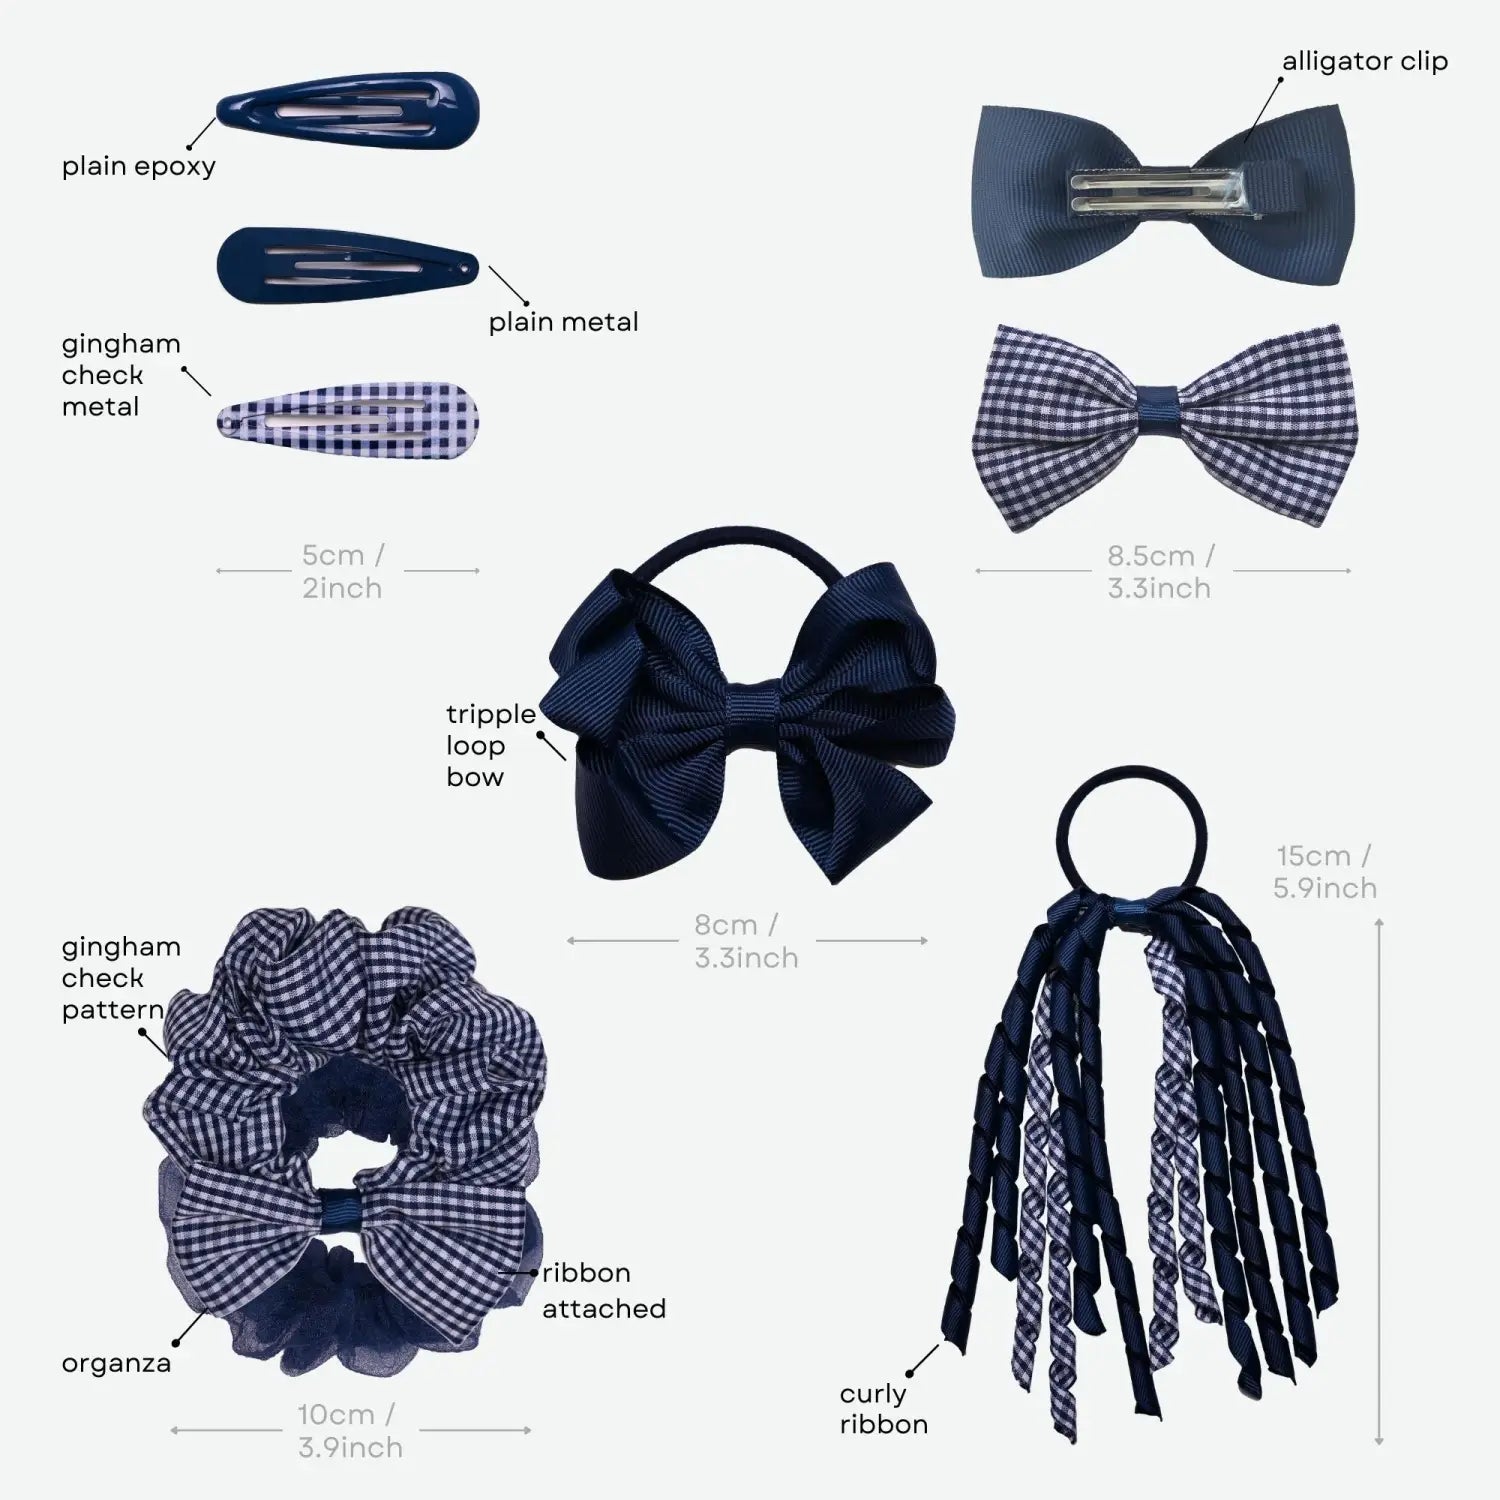 16PCS Gingham Check School Girl Hair Accessories Set with Bow Ties and Hair Clips